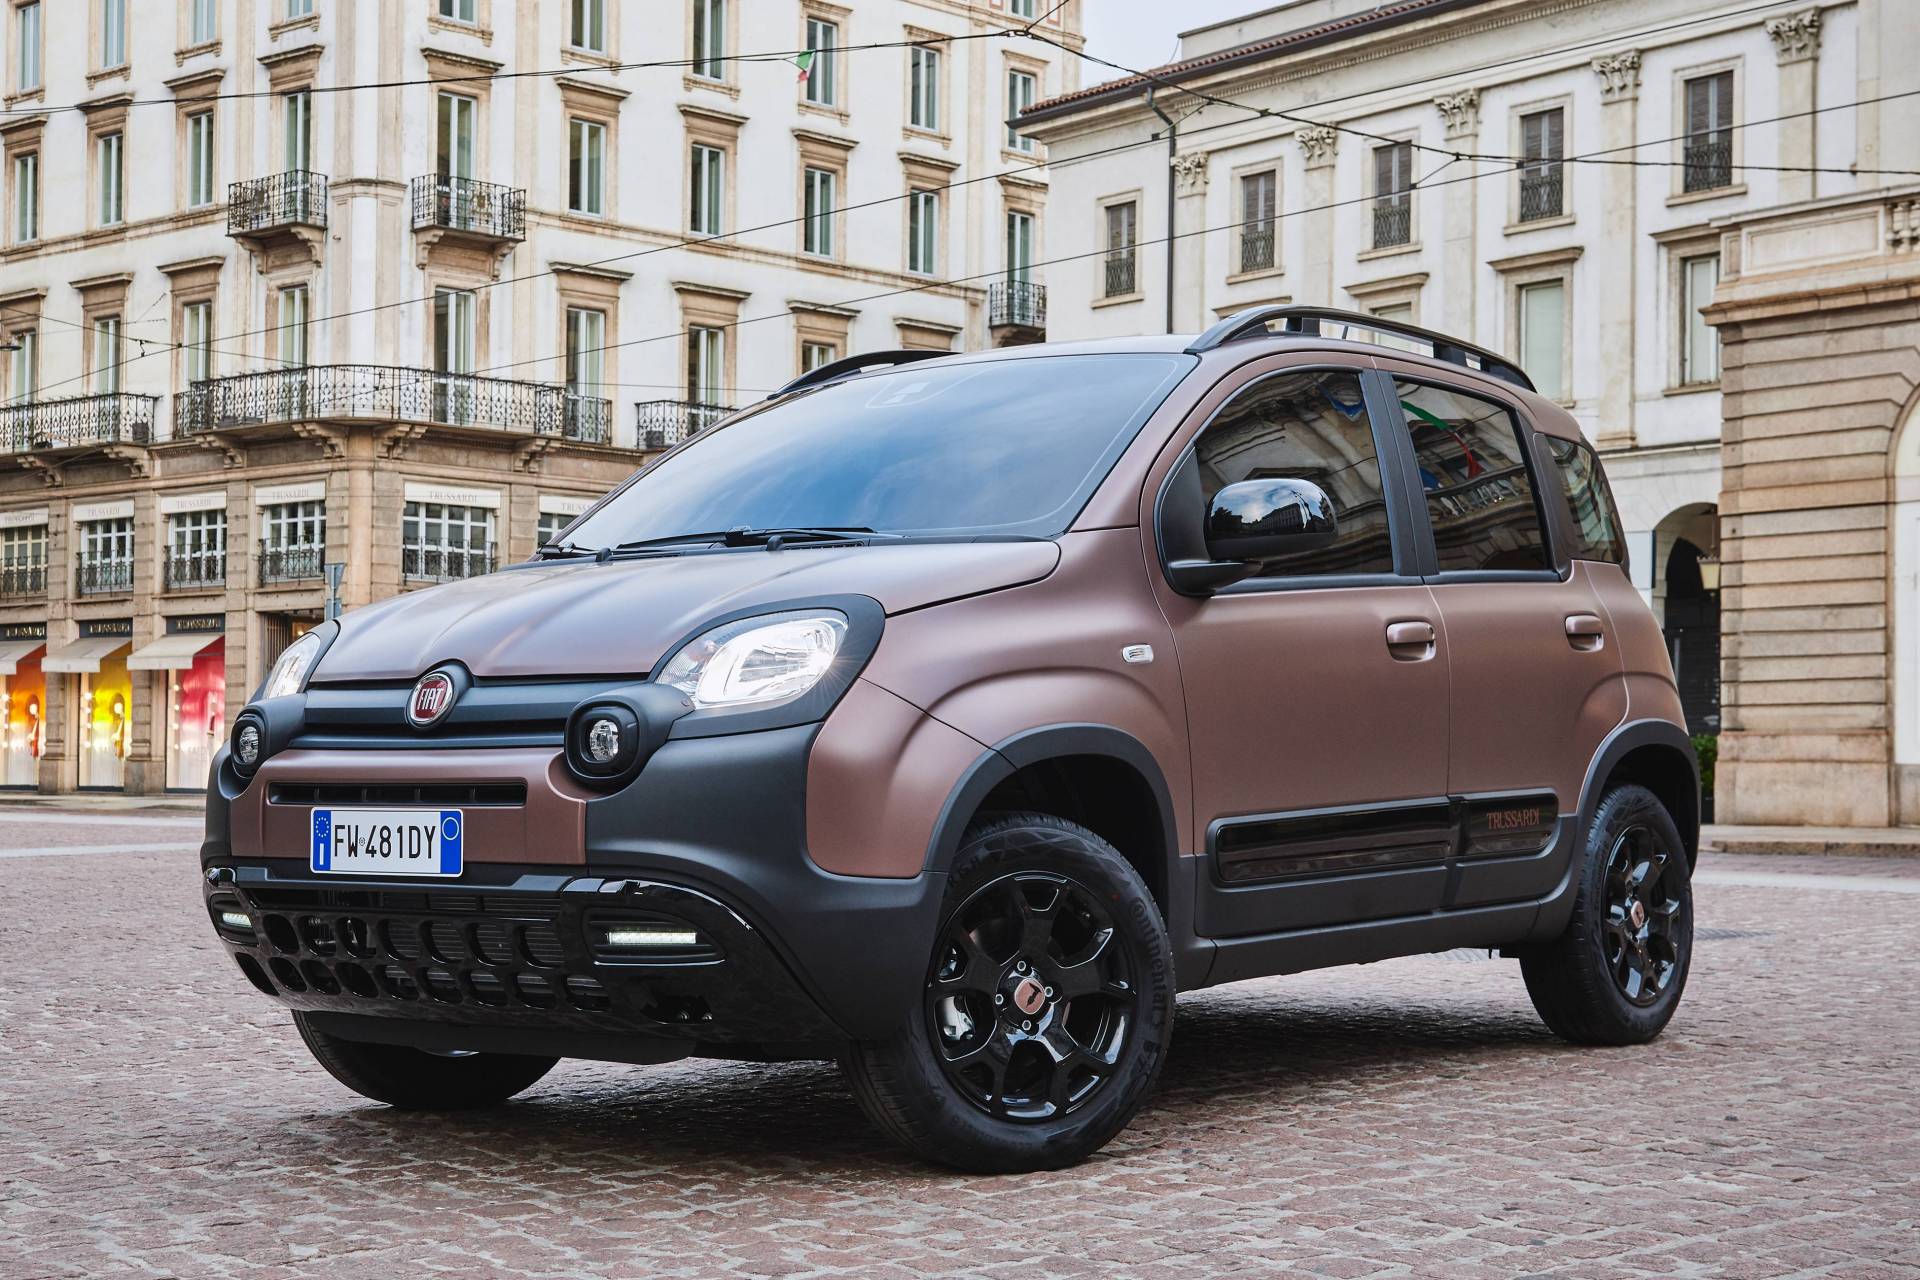 New Panda Trussardi Is The First Luxury Version Of Fiat S City Car Carscoops